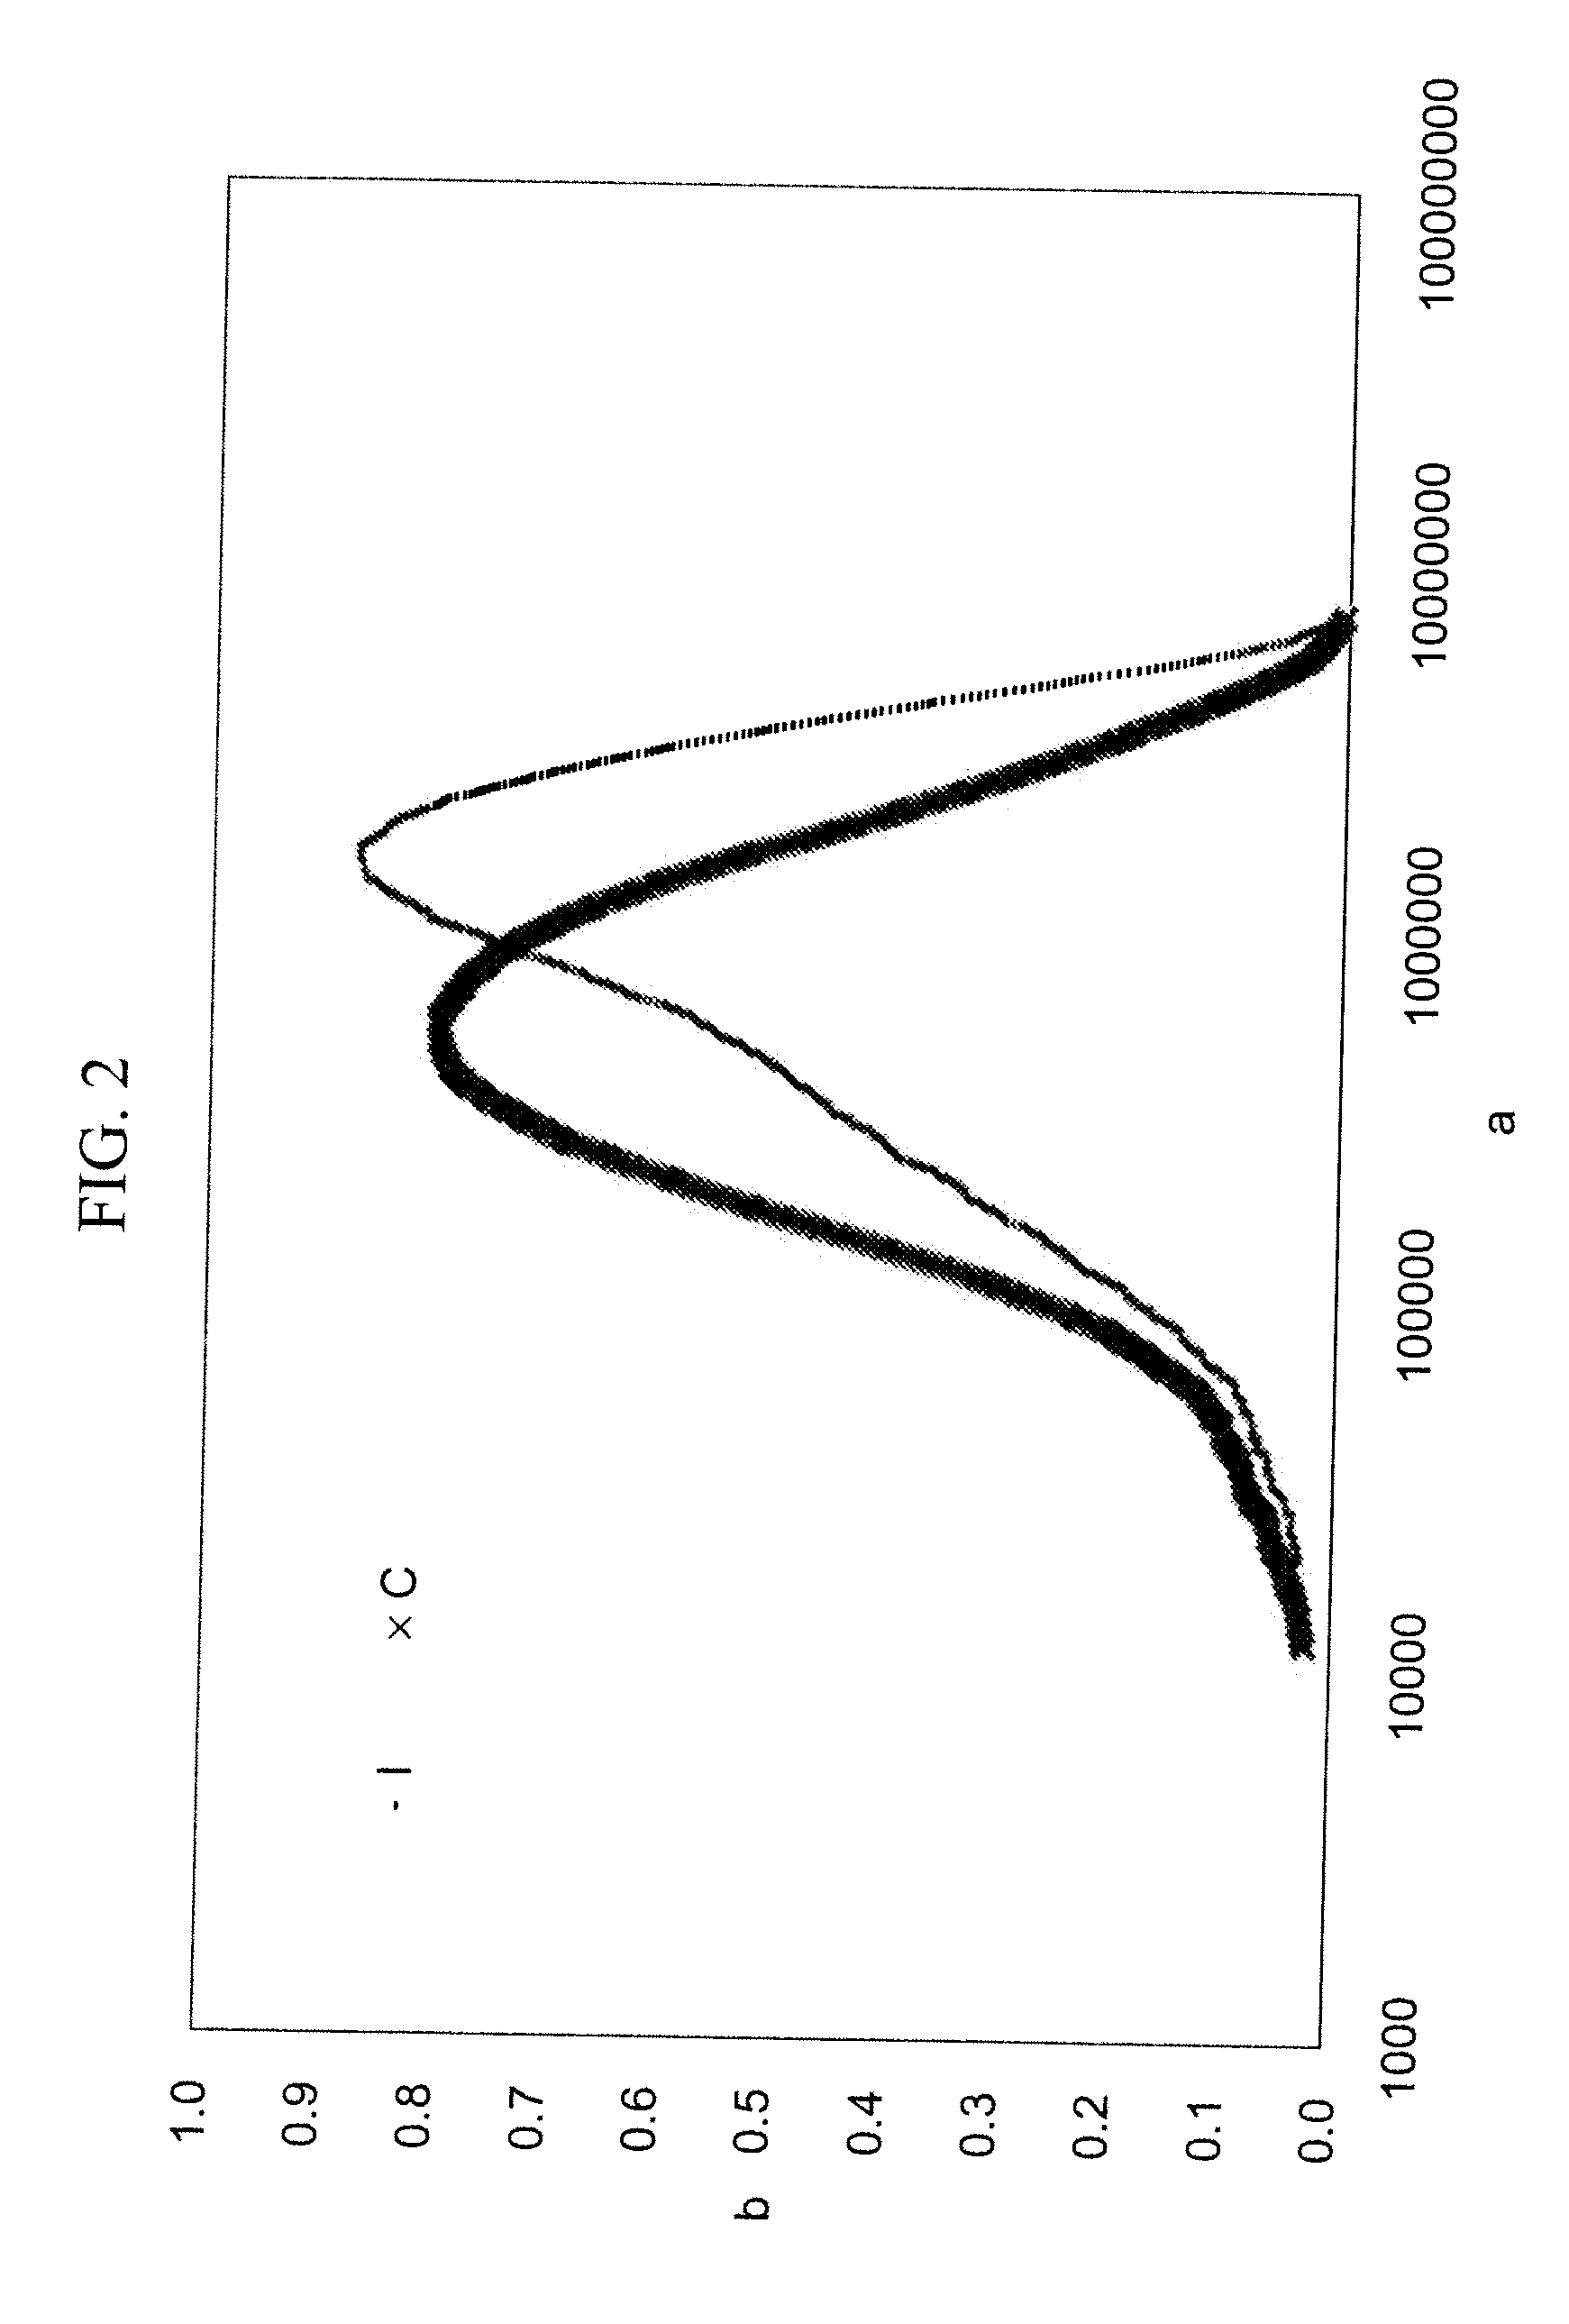 Method for Chemically Modifying the Internal Region of a Hair Shaft